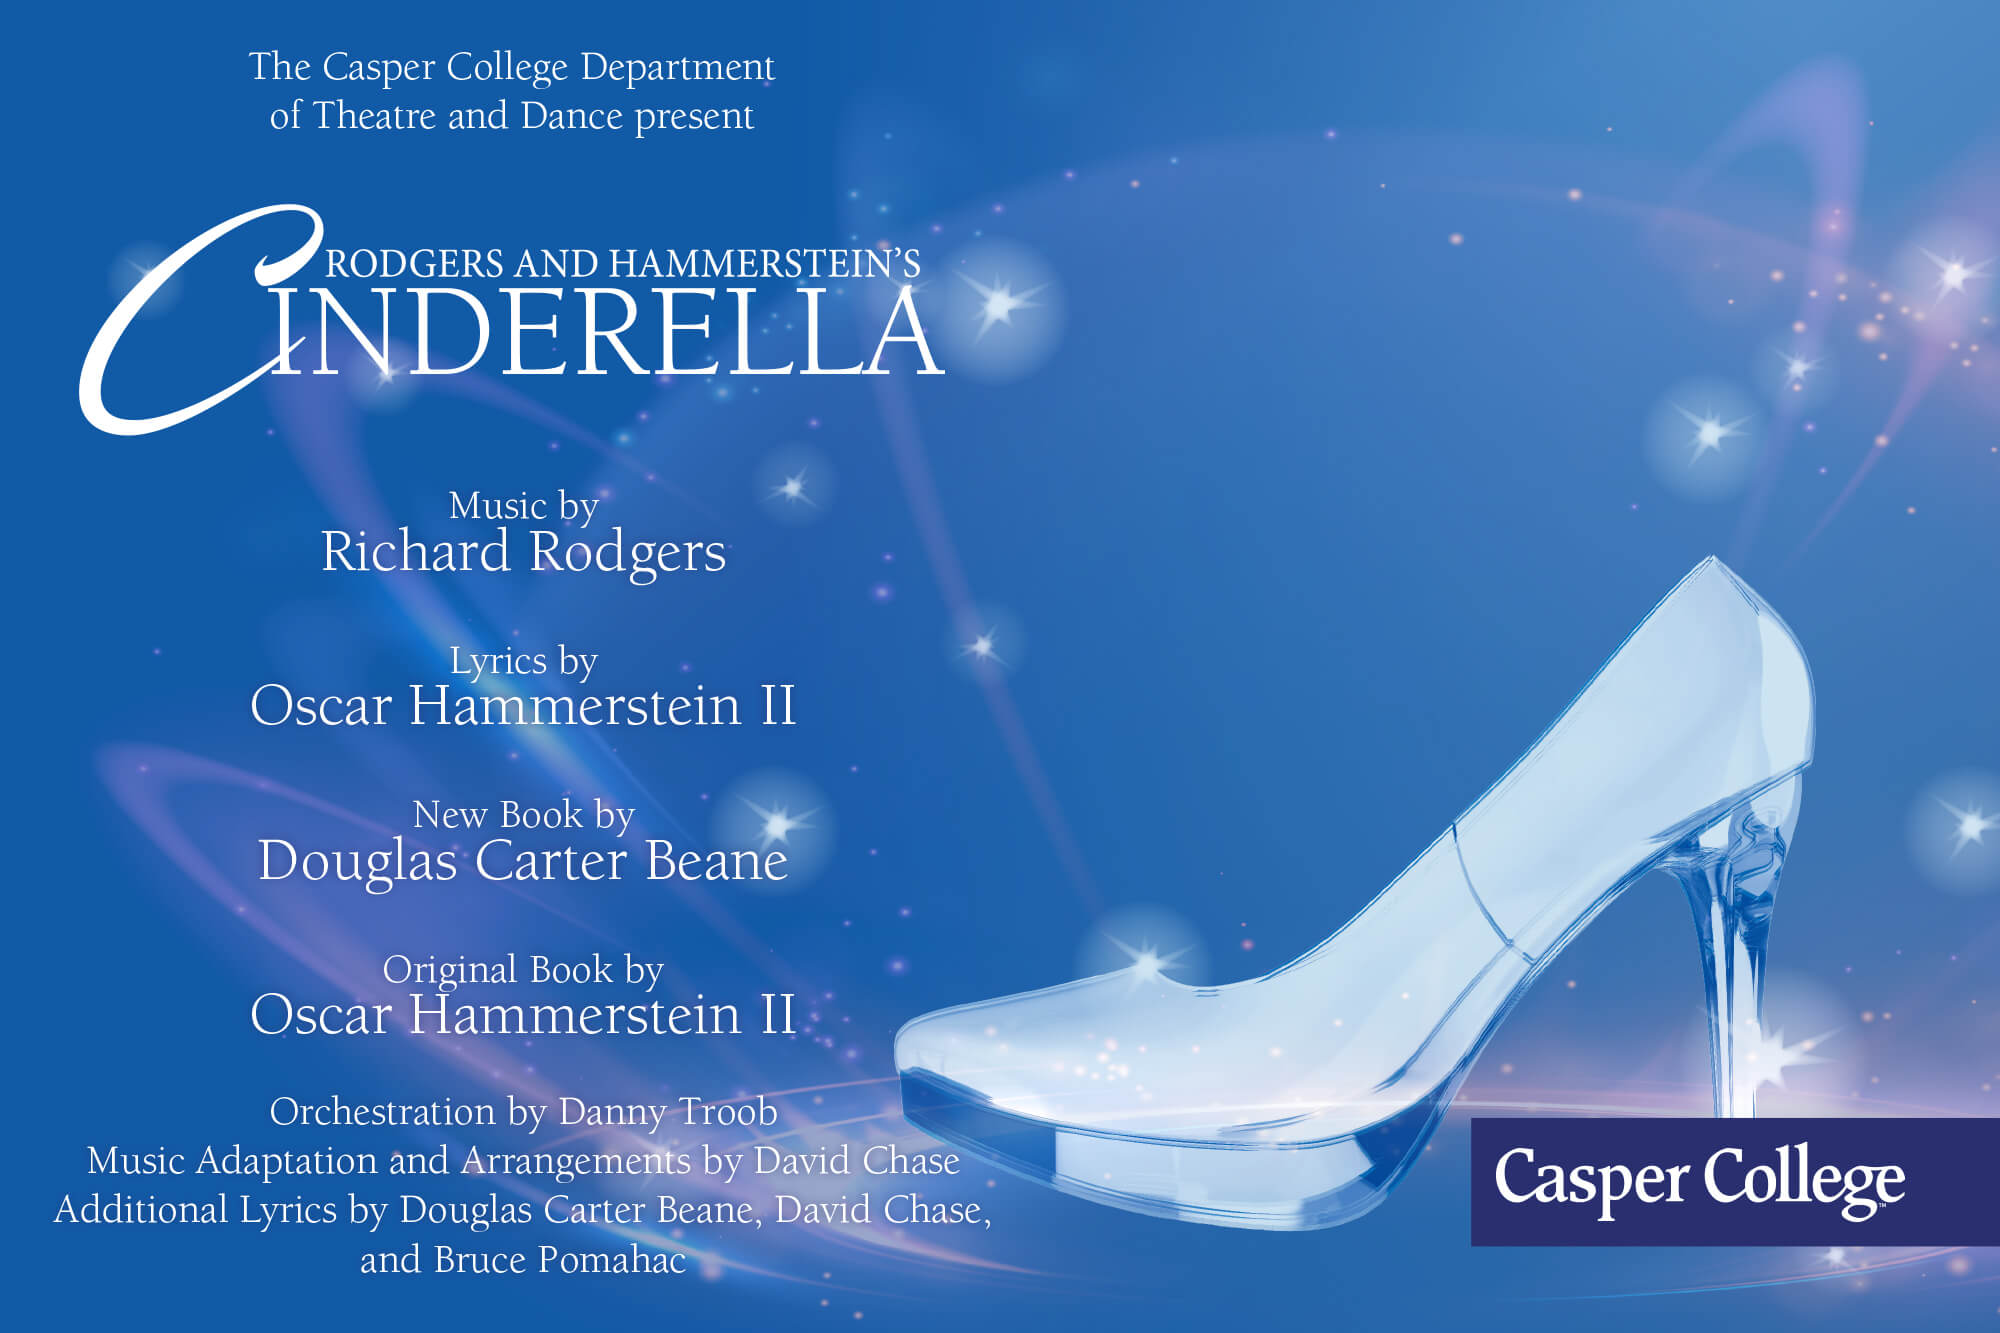 Image for press release for "Cinderella"